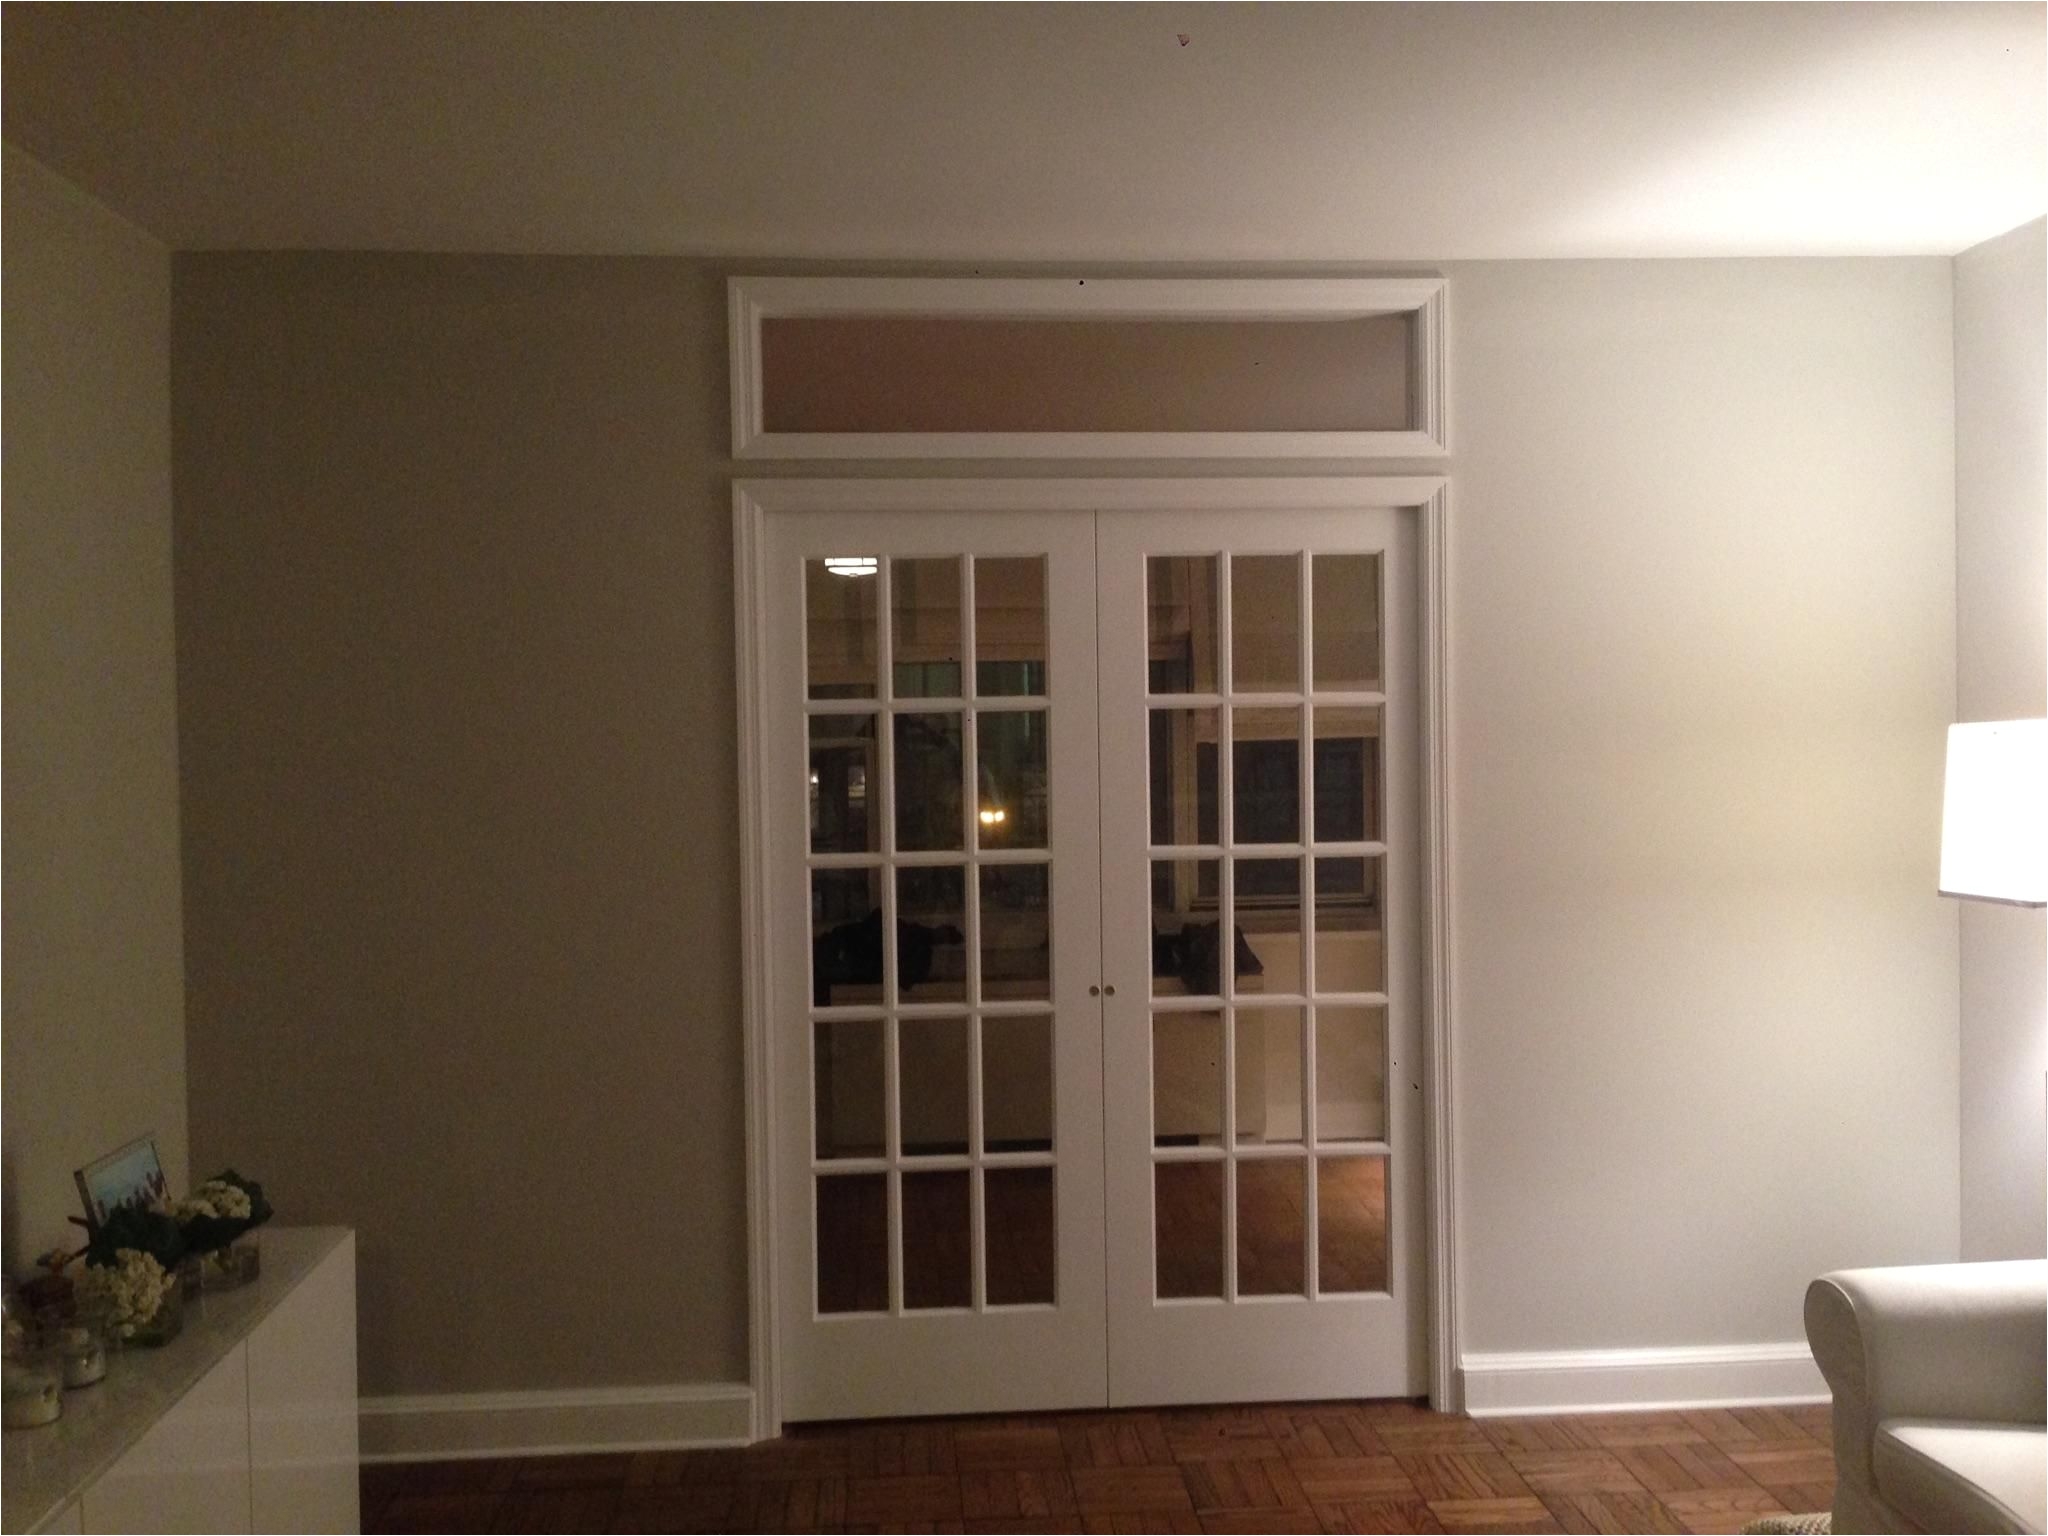 custom temporary wall system with double french doors and borrowed light window we recently installed in nyc apartment for more information and free